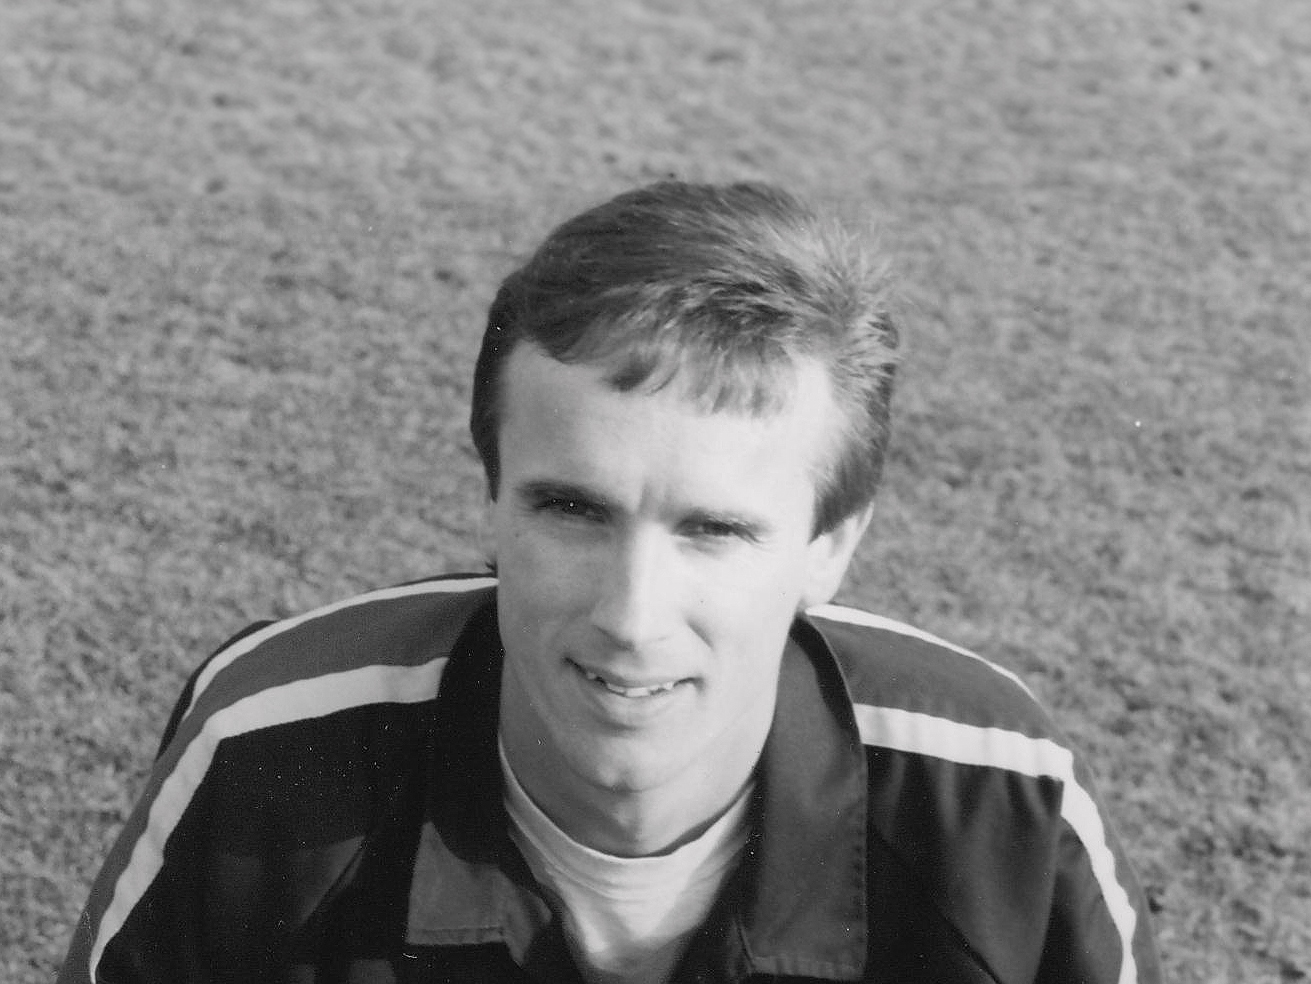 A black and white headshot image of former Albion player Paul Holmes